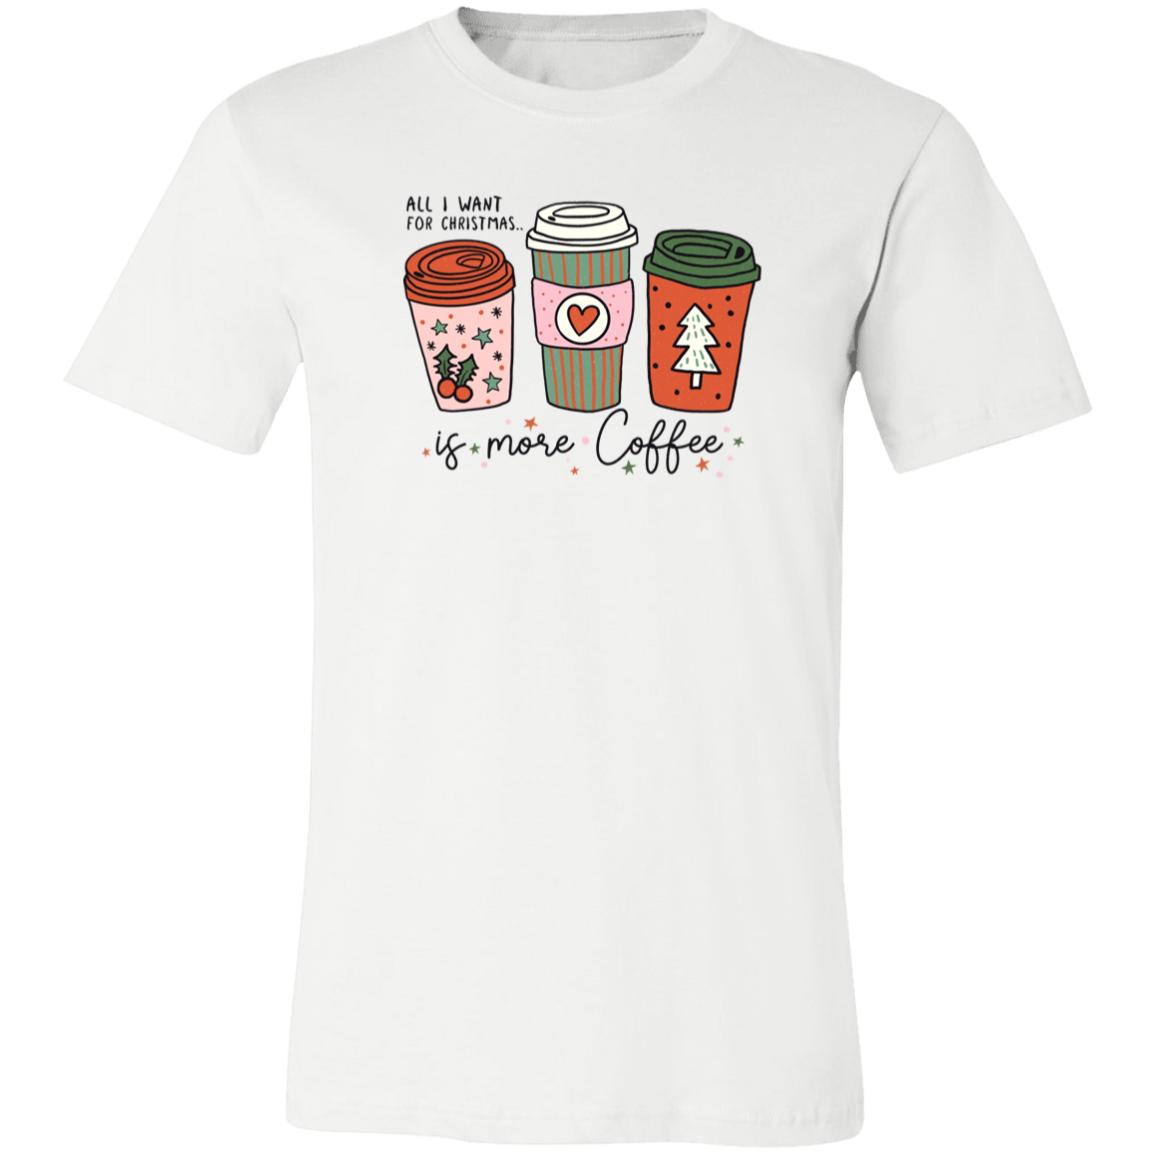 All I Want For Christmas Is More Coffee! Shirt